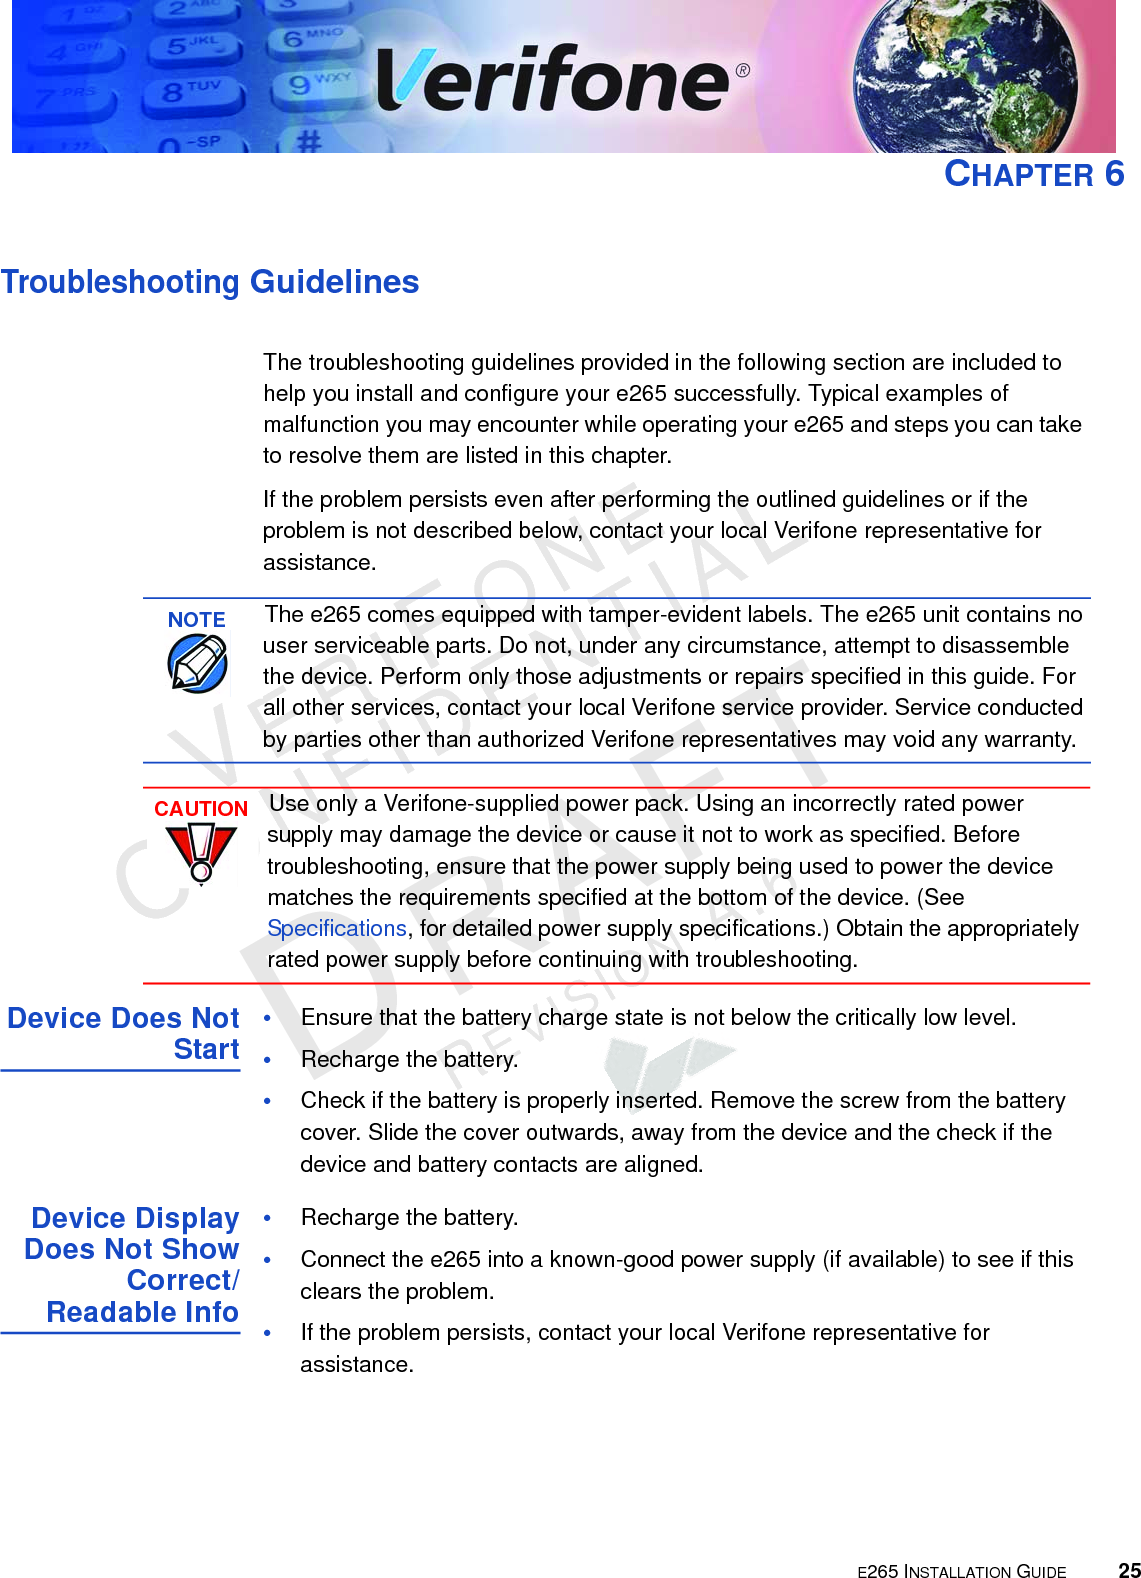 E265 INSTALLATION GUIDE 25VERIFONECONFIDENTIALREVISION A.6 CHAPTER 6Troubleshooting GuidelinesThe troubleshooting guidelines provided in the following section are included to help you install and configure your e265 successfully. Typical examples of malfunction you may encounter while operating your e265 and steps you can take to resolve them are listed in this chapter. If the problem persists even after performing the outlined guidelines or if the problem is not described below, contact your local Verifone representative for assistance. Device Does Not Start•Ensure that the battery charge state is not below the critically low level. •Recharge the battery.•Check if the battery is properly inserted. Remove the screw from the battery cover. Slide the cover outwards, away from the device and the check if the device and battery contacts are aligned.Device Display Does Not Show Correct/Readable Info•Recharge the battery.•Connect the e265 into a known-good power supply (if available) to see if this clears the problem.•If the problem persists, contact your local Verifone representative for assistance.NOTEThe e265 comes equipped with tamper-evident labels. The e265 unit contains no user serviceable parts. Do not, under any circumstance, attempt to disassemble the device. Perform only those adjustments or repairs specified in this guide. For all other services, contact your local Verifone service provider. Service conducted by parties other than authorized Verifone representatives may void any warranty.CAUTIONUse only a Verifone-supplied power pack. Using an incorrectly rated power supply may damage the device or cause it not to work as specified. Before troubleshooting, ensure that the power supply being used to power the device matches the requirements specified at the bottom of the device. (See Specifications, for detailed power supply specifications.) Obtain the appropriately rated power supply before continuing with troubleshooting.